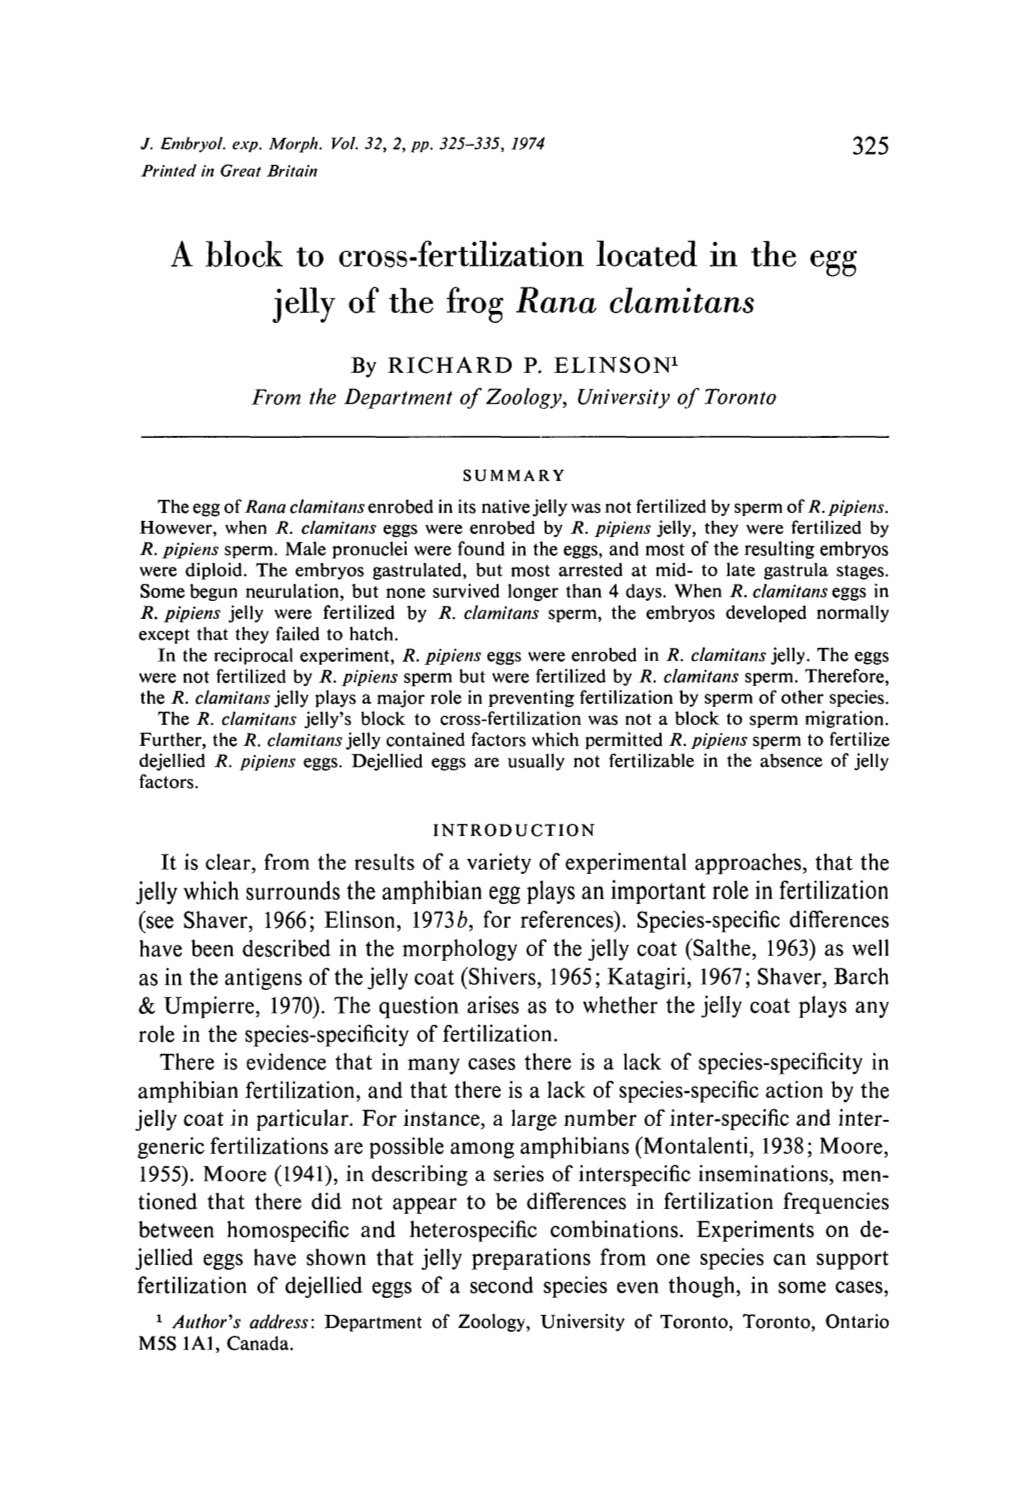 A Block to Cross-Fertilization Located in the Egg Jelly of the Frog Rana Clamitans